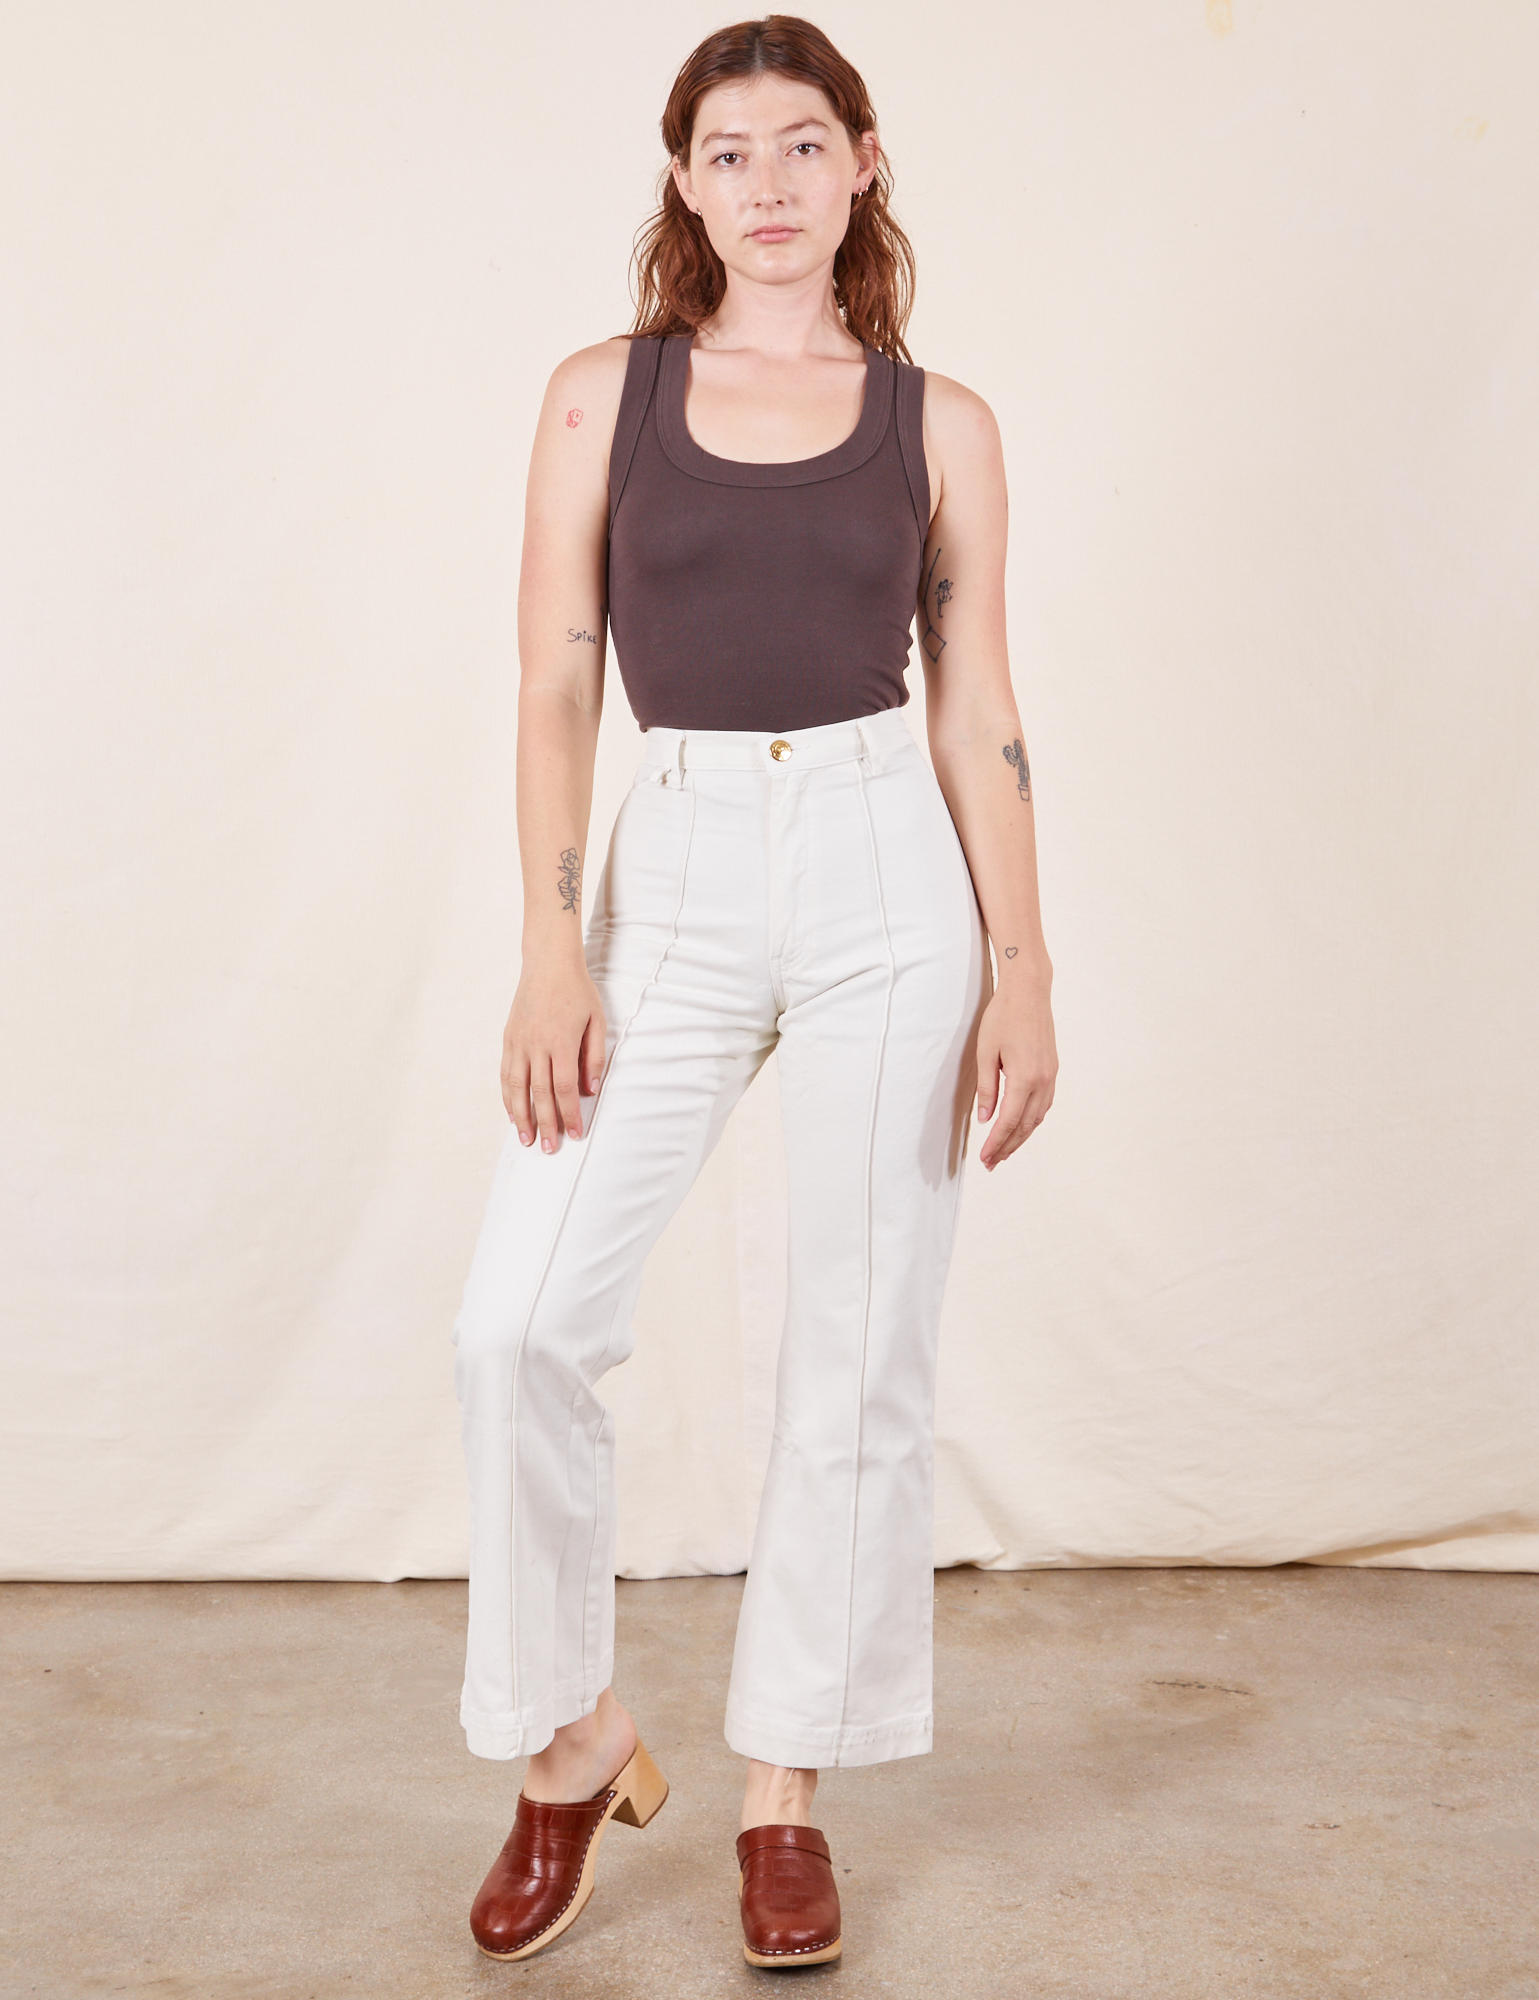 Alex is 5&#39;8&quot; and wearing XS Western Pants in Vintage Tee Off-White paired with espresso brown Tank Top